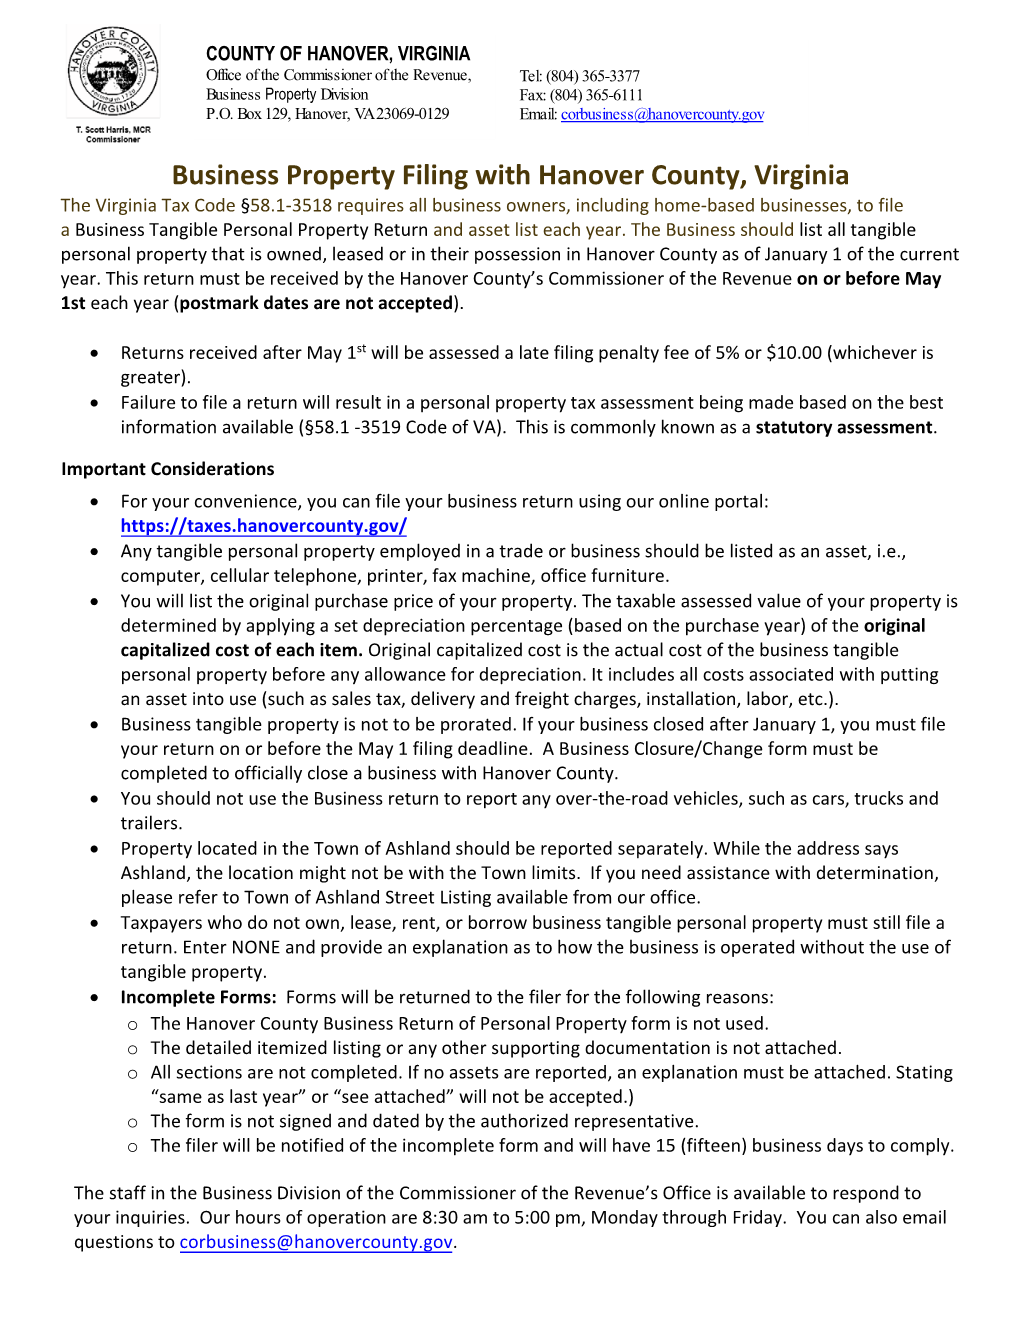 Business Personal Property Return 2021